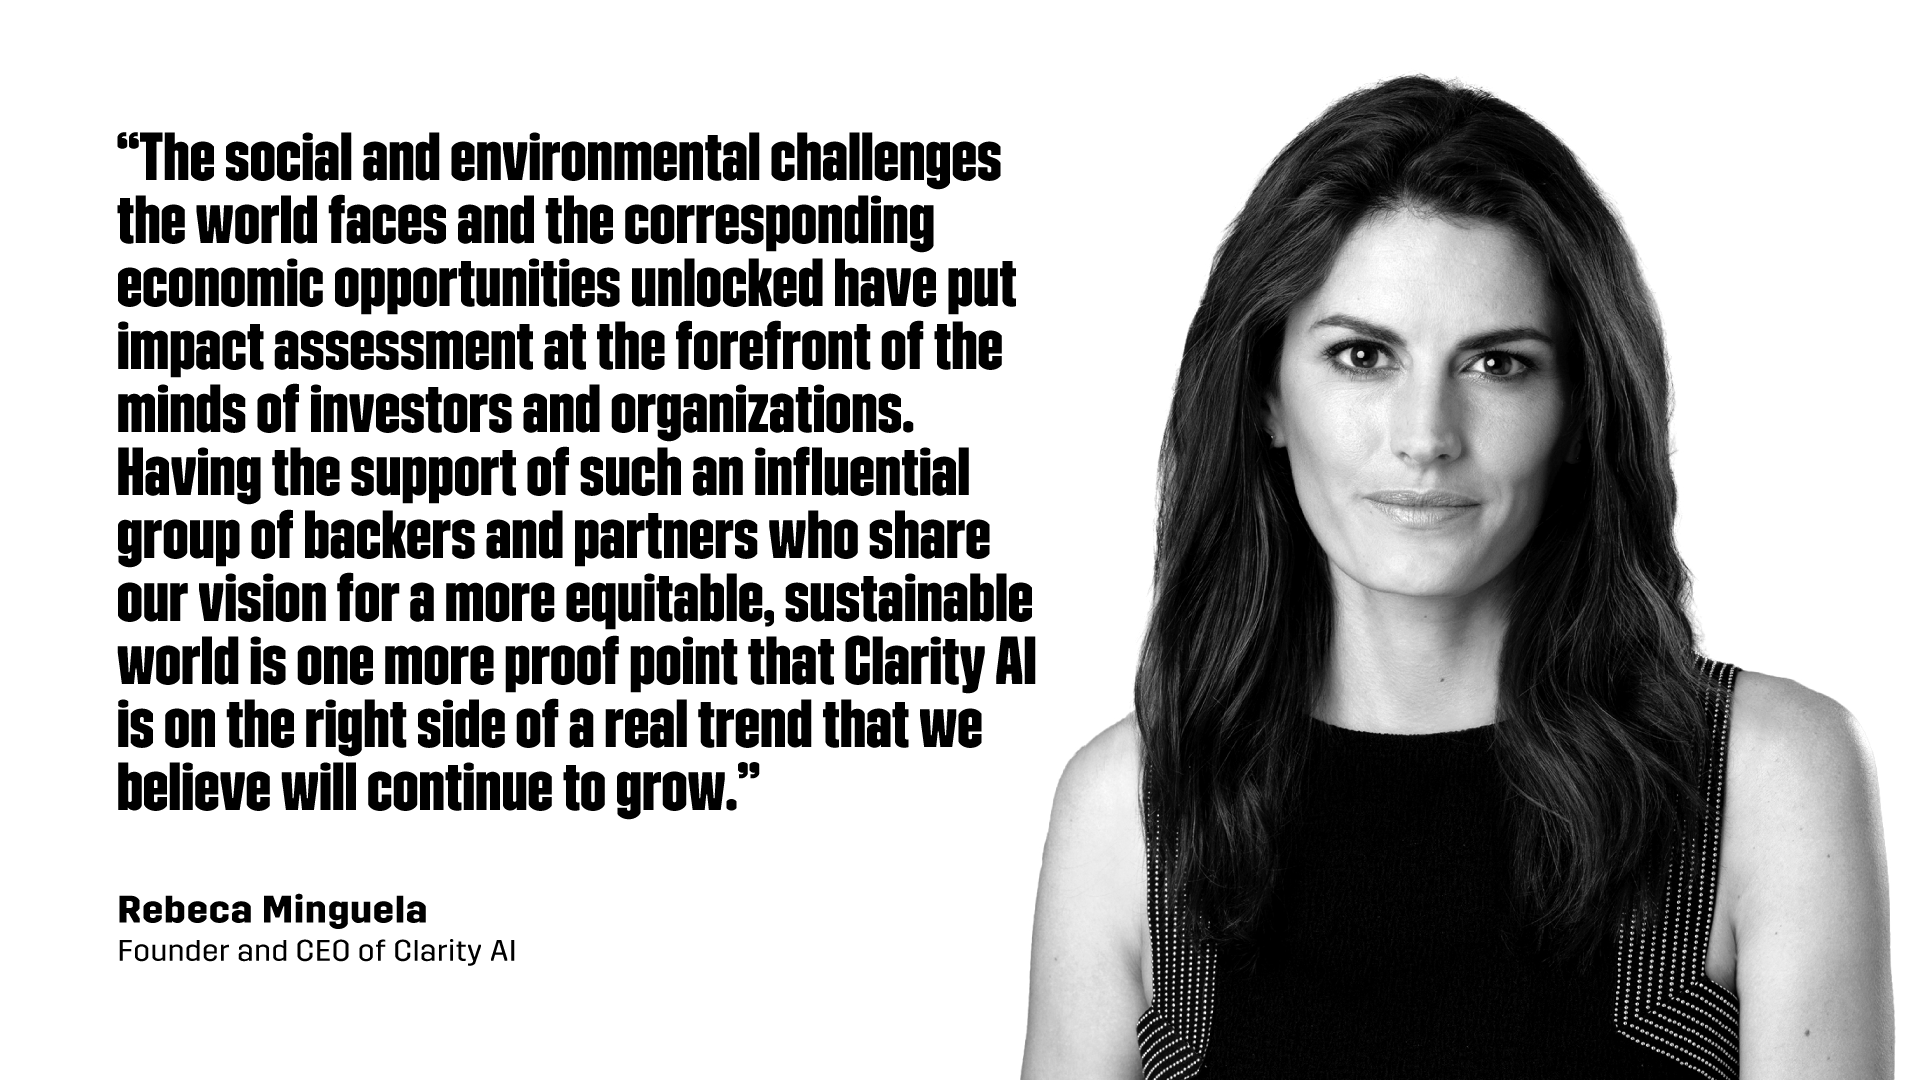 “The social and environmental challenges the world faces and the corresponding economic opportunities unlocked have put impact assessment at the forefront of the minds of investors and organizations. Having the support of such an influential group of backers and partners who share our vision for a more equitable, sustainable world is one more proof point that Clarity AI is on the right side of a real trend that we believe will continue to grow.” - Rebeca Minguela, Founder and CEO of Clarity AI